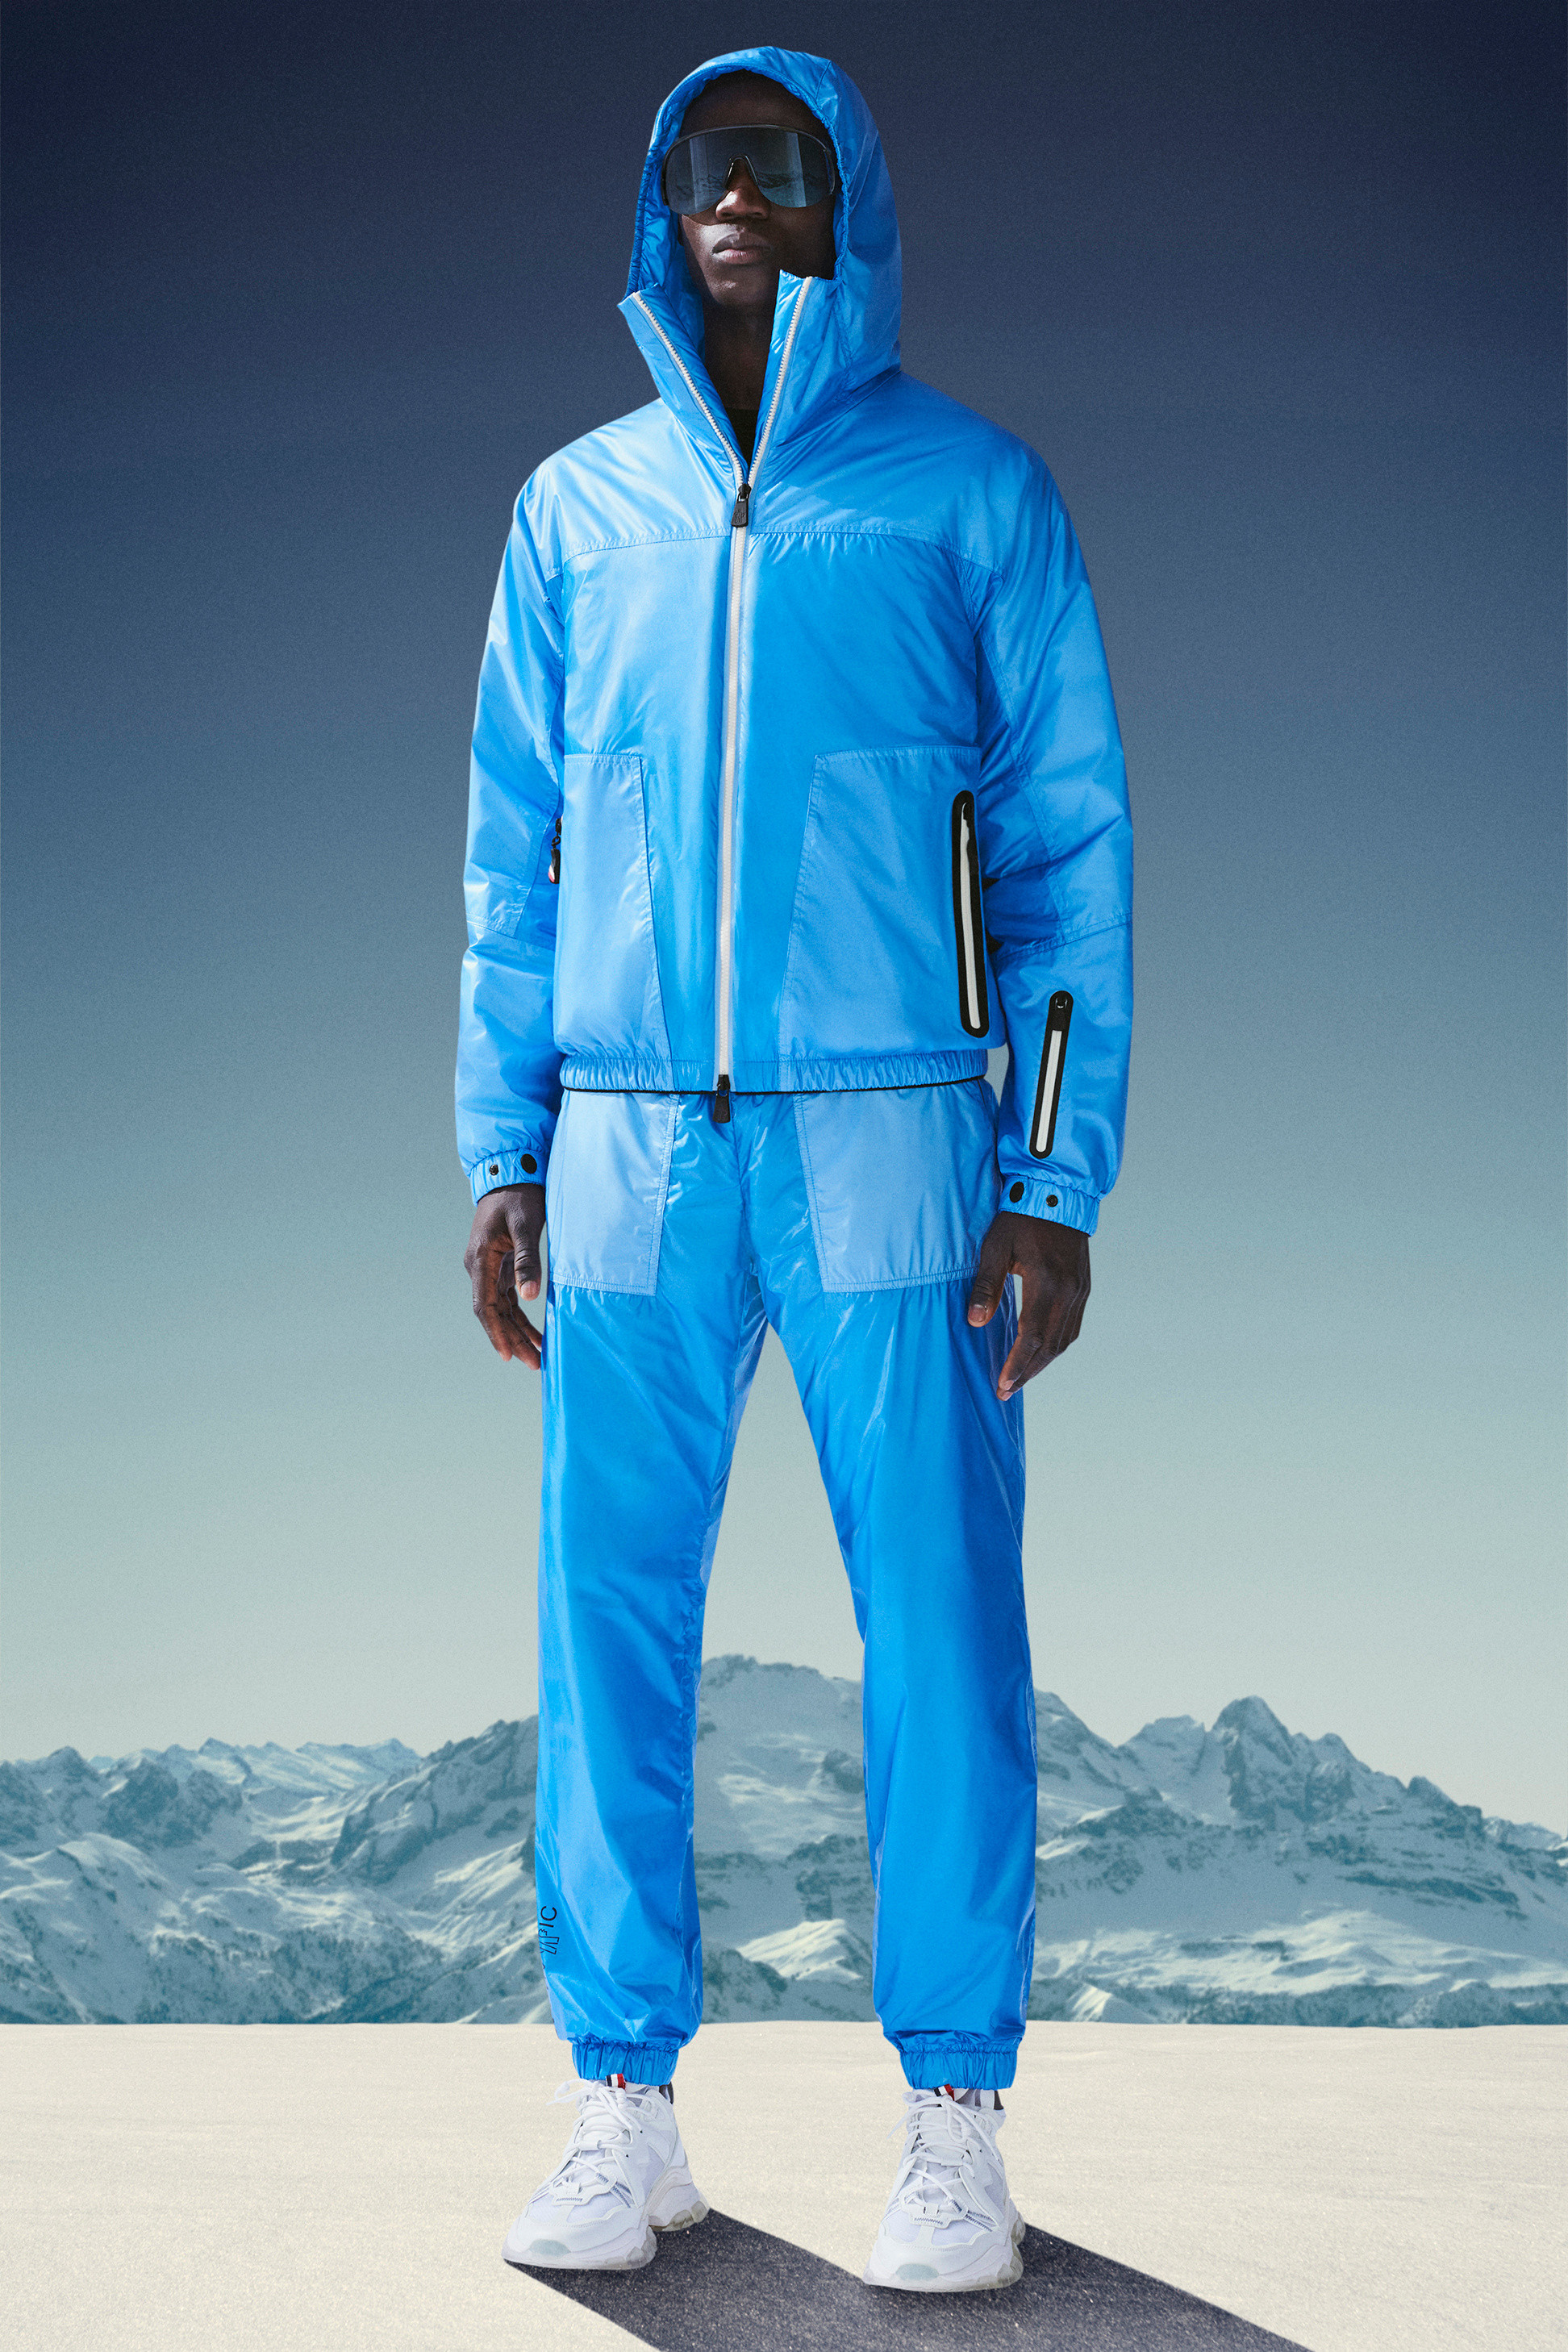 View All Designs for Men - Grenoble | Moncler US